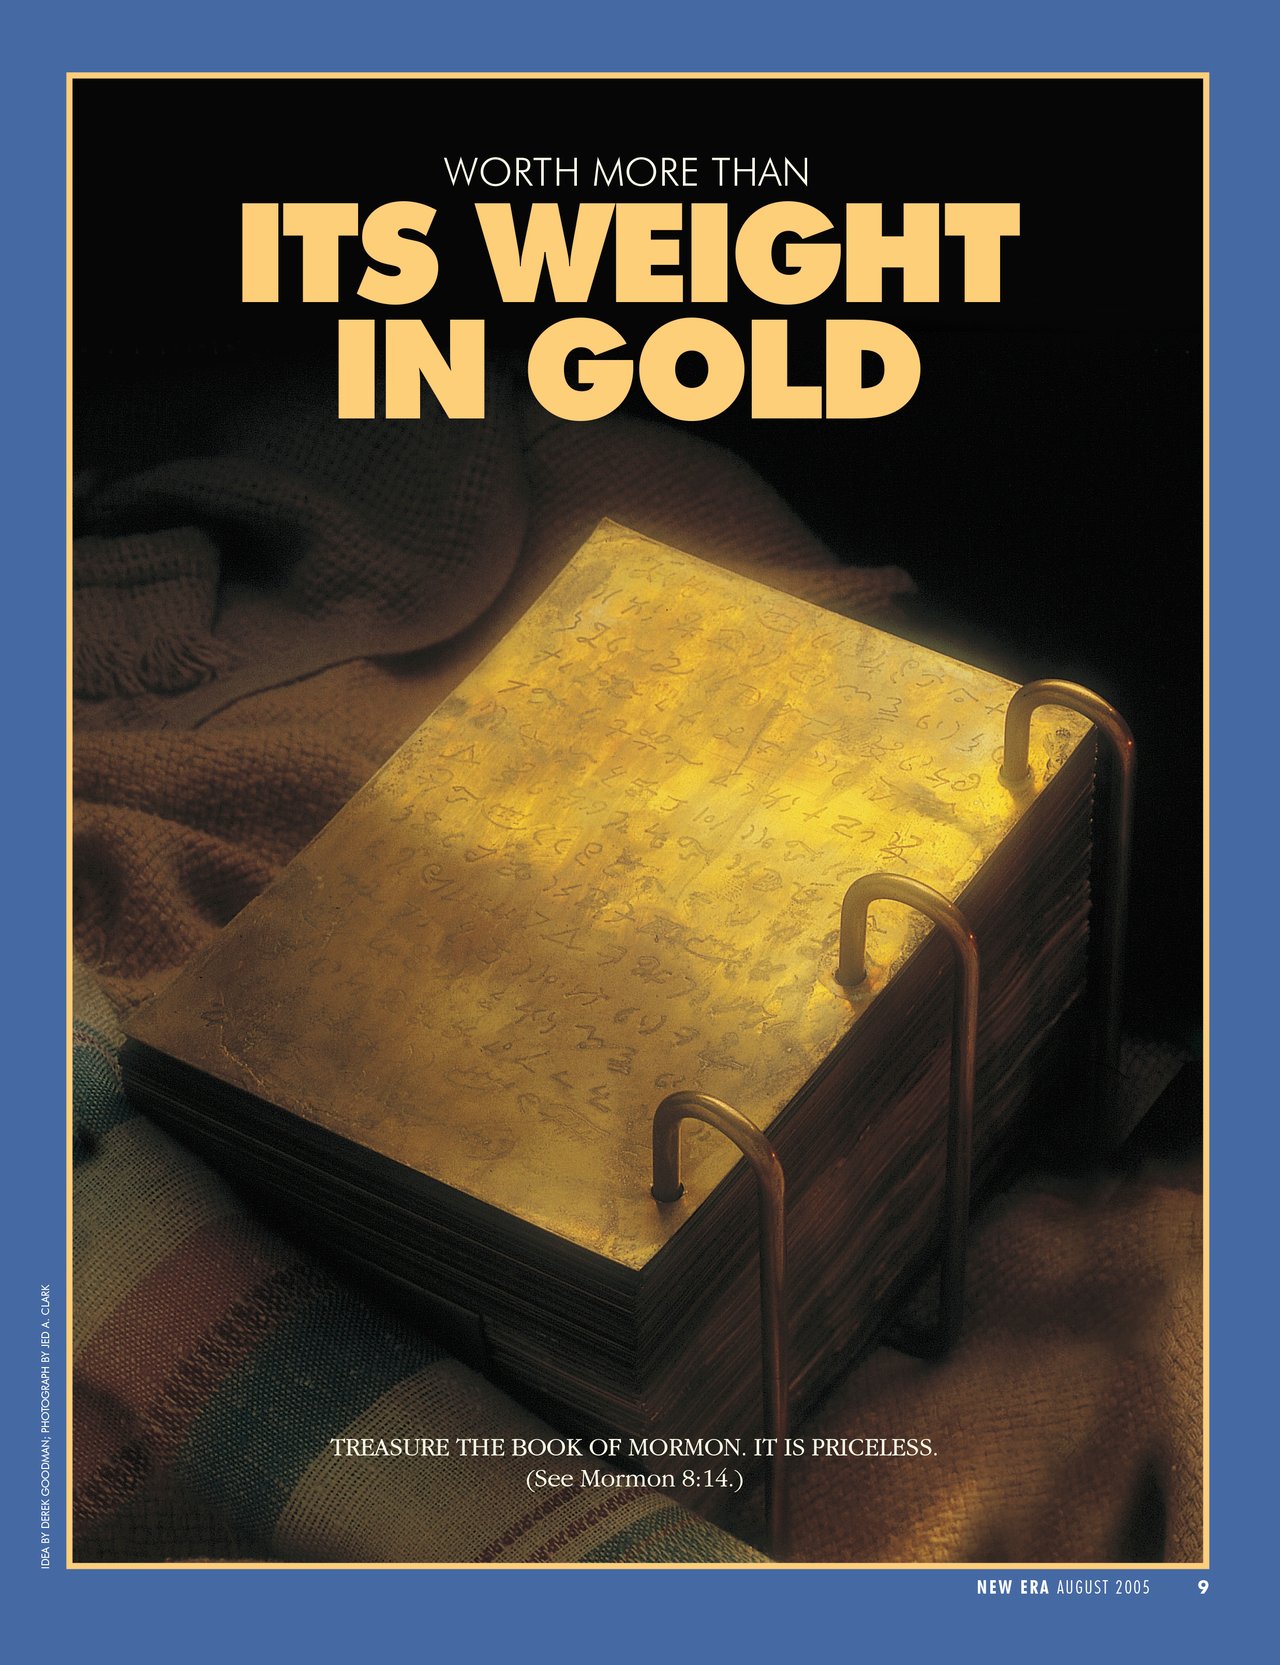 A Mormonad from the August 2005 issue of The New Era magazine with a picture of the golden plates titled "Worth More Than Its Weight In Gold."